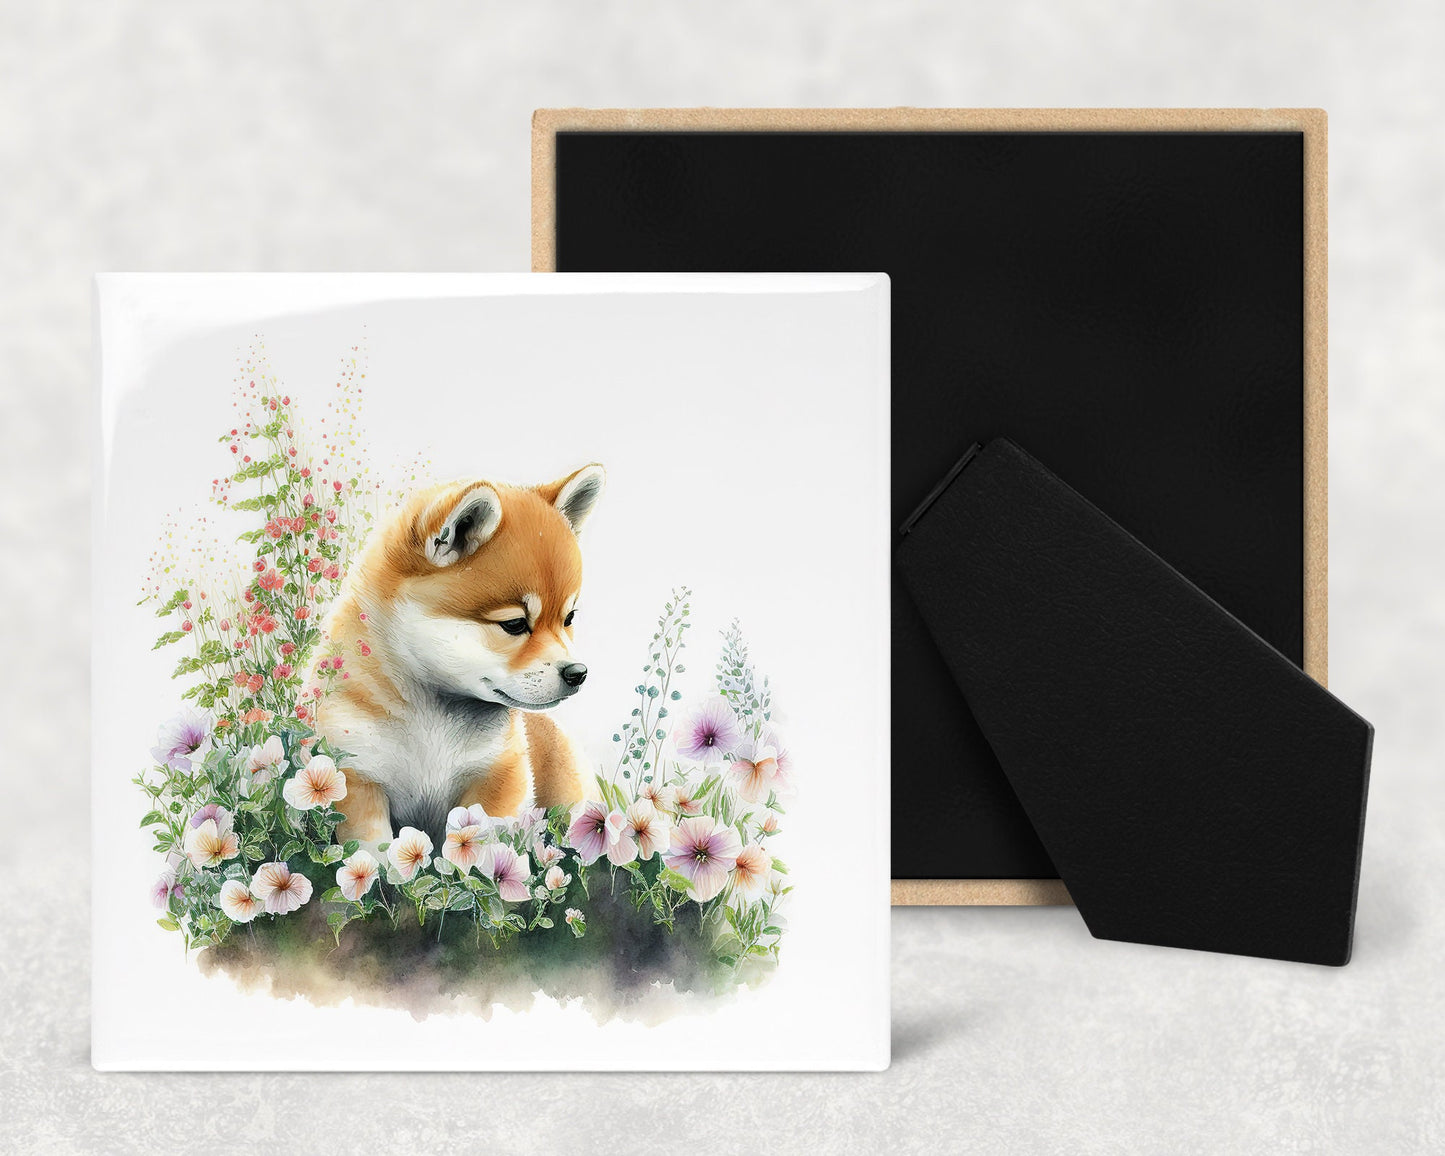 Cute Shiba Inu Puppy Art Decorative Ceramic Tile Set with Optional Easel Back - Available in 4 sizes - Set of 4